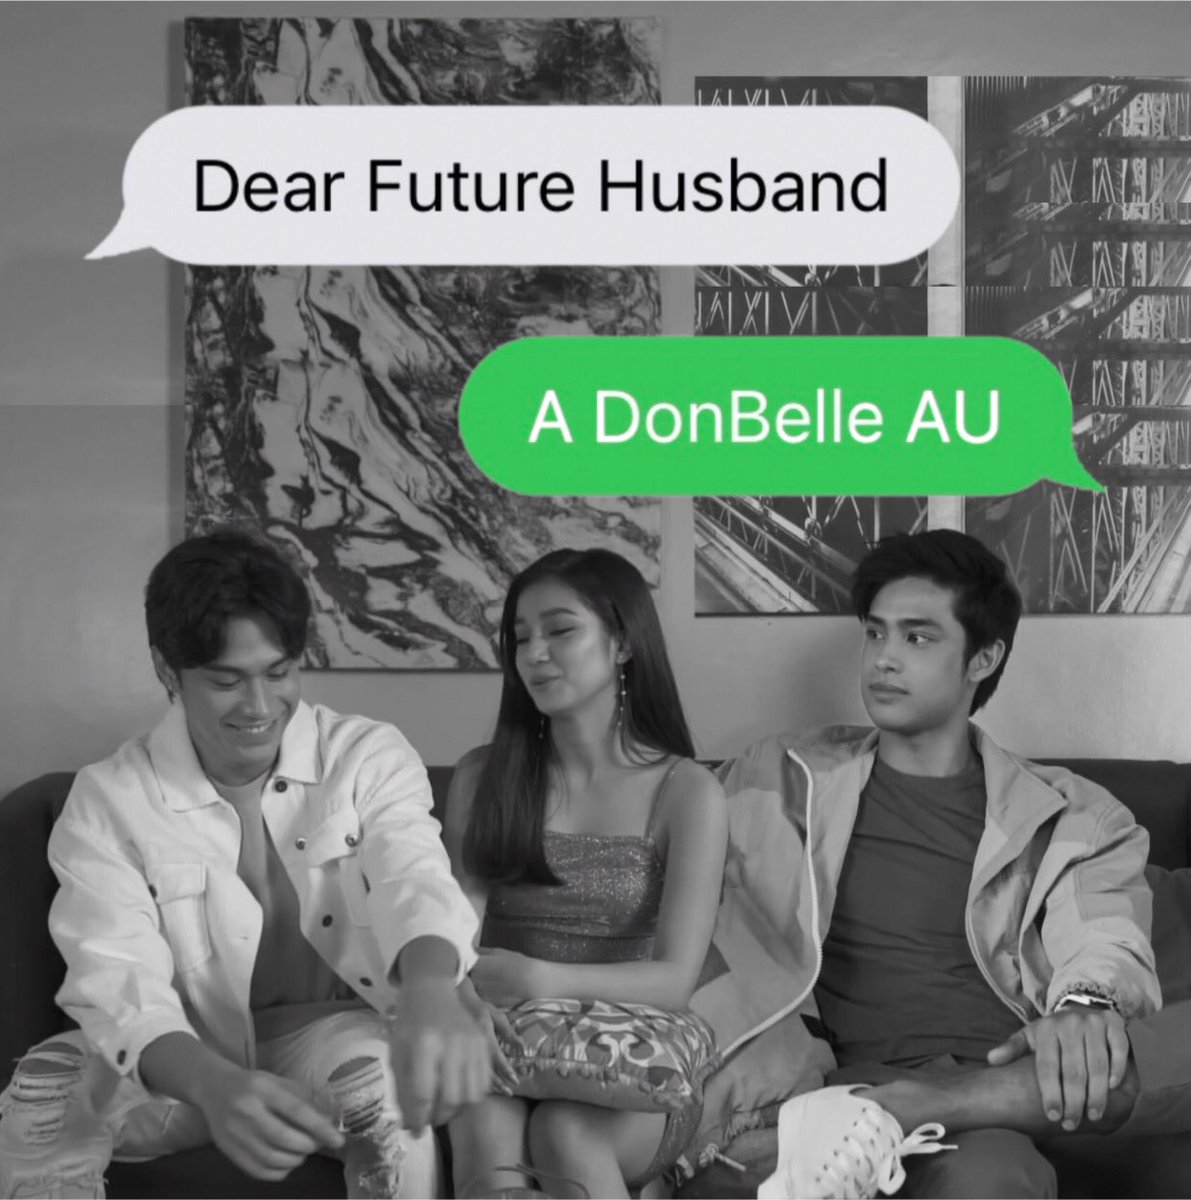 𝘿𝙀𝘼𝙍 𝙁𝙐𝙏𝙐𝙍𝙀 𝙃𝙐𝙎𝘽𝘼𝙉𝘿-A  #Donbelle serye wherein Marielle’s ‘Dear Future Husband’ text messages that are supposed to be for her crush Maiah Panganiban, was wrongfully sent to Dominic Pangilinan. #Donbelle #DONBELLEmpire